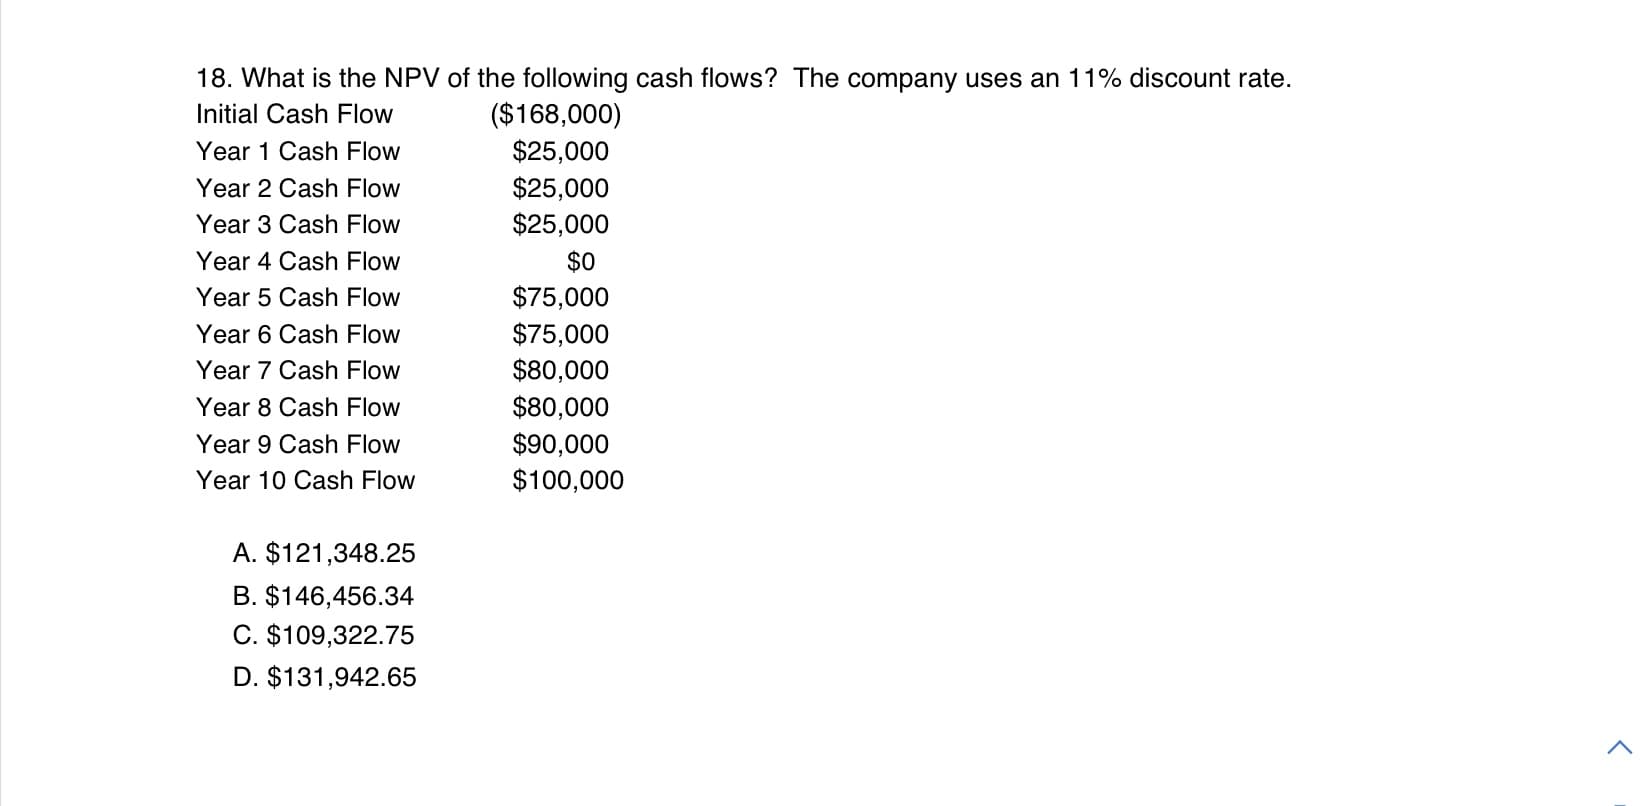 18. What is the NPV of the following cash flows? The company uses an 11% discount rate.
($168,000)
$25,000
$25,000
$25,000
Initial Cash Flow
Year 1 Cash Flow
Year 2 Cash Flow
Year 3 Cash Flow
Year 4 Cash Flow
$0
$75,000
$75,000
$80,000
Year 5 Cash Flow
Year 6 Cash Flow
Year 7 Cash Flow
$80,000
$90,000
$100,000
Year 8 Cash Flow
Year 9 Cash Flow
Year 10 Cash Flow
A. $121,348.25
B. $146,456.34
C. $109,322.75
D. $131,942.65
